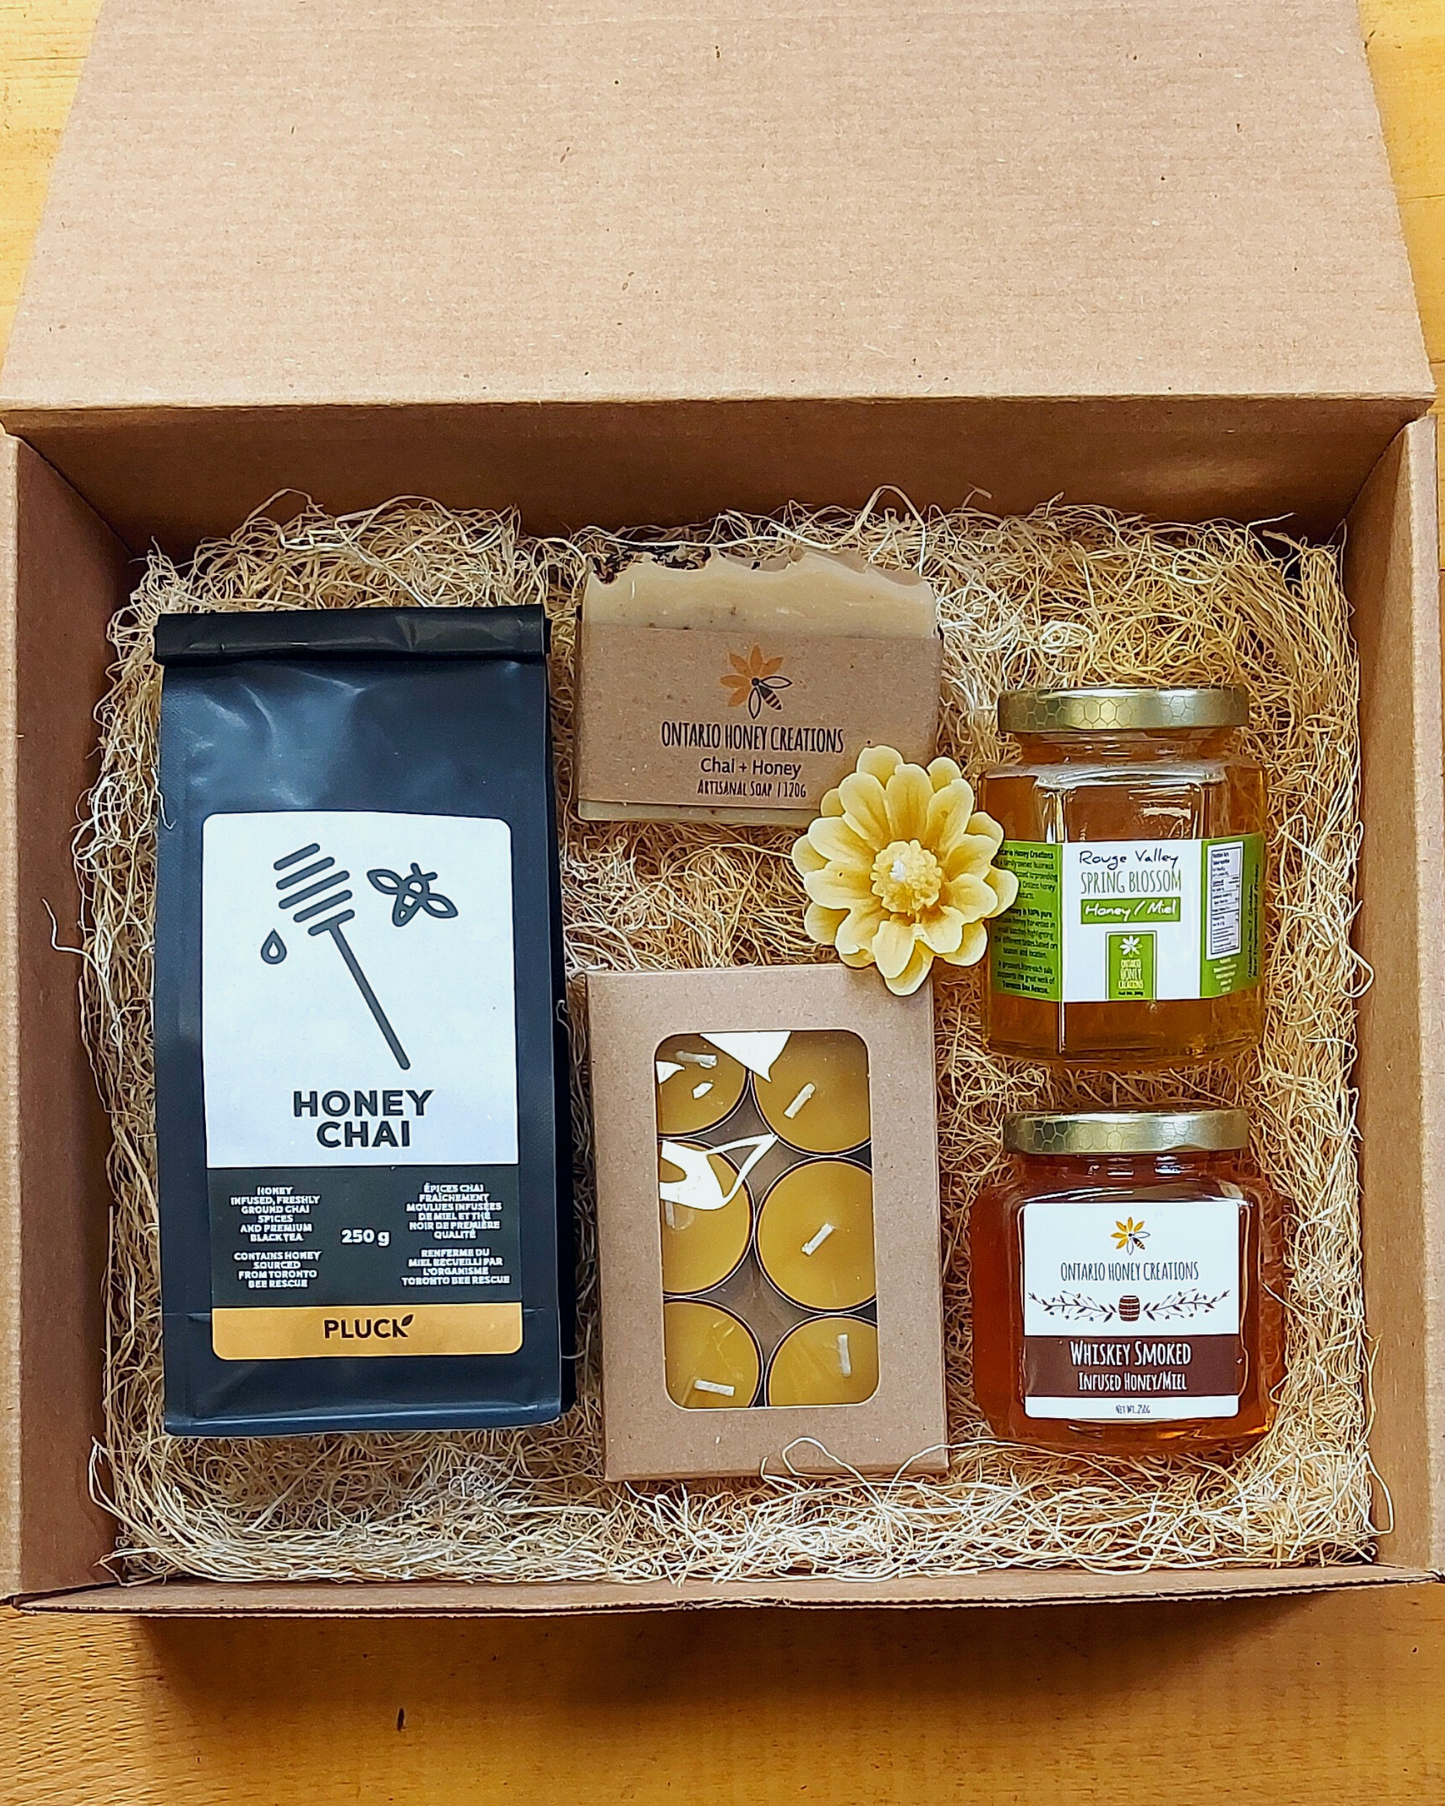 Gift box with Honey Chai Tea, Beeswax Tealight Candles, Chai Honey Soap, Whiskey Smoked Honey, and Rouge Valley Spring Honey